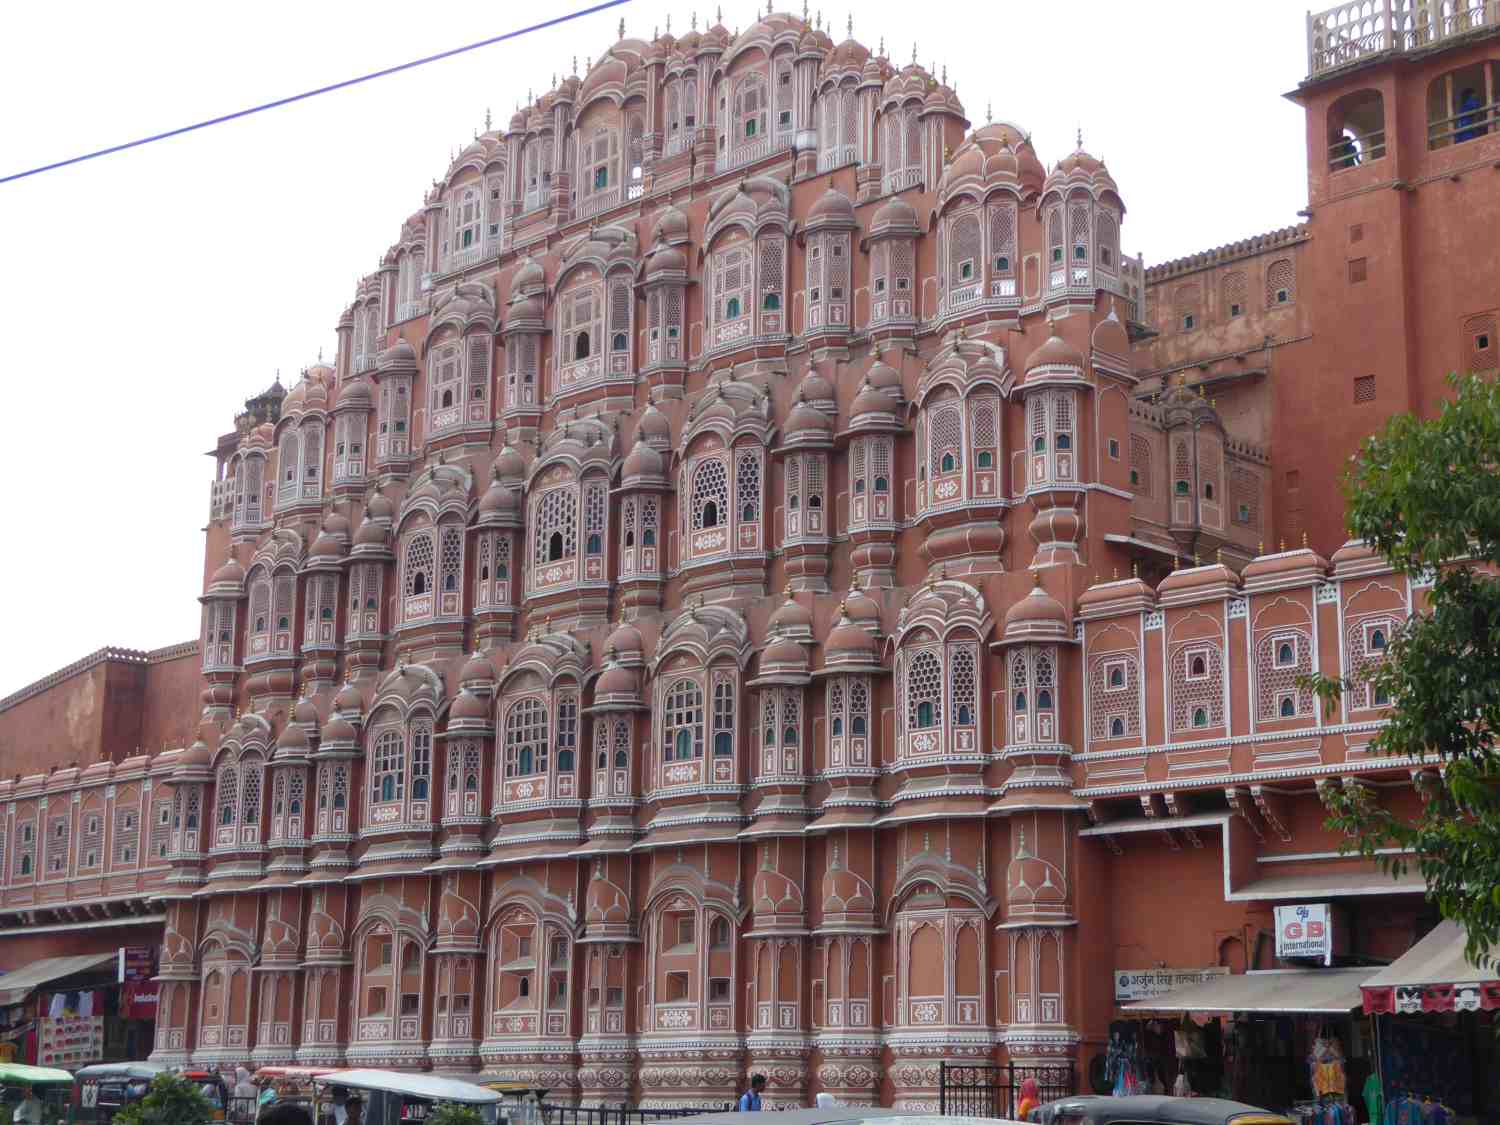 Hawa Mahal - From the outside a grandiose palace, but actually only a facade